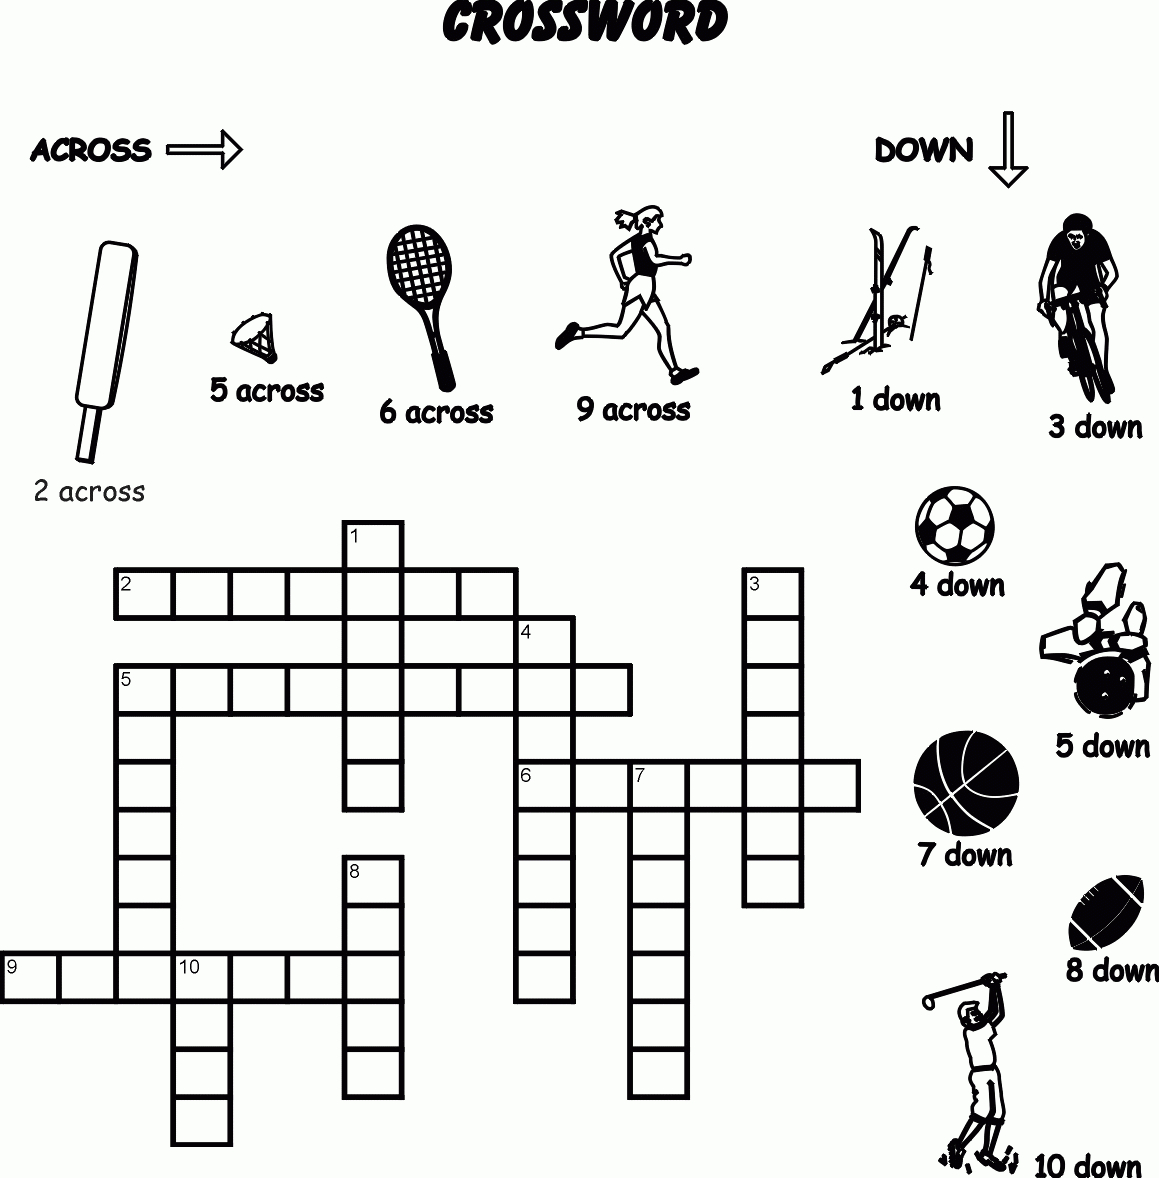 14 Sports Crossword Puzzles | Kittybabylove - Free Printable Sports - Printable Crossword Puzzles About Sports